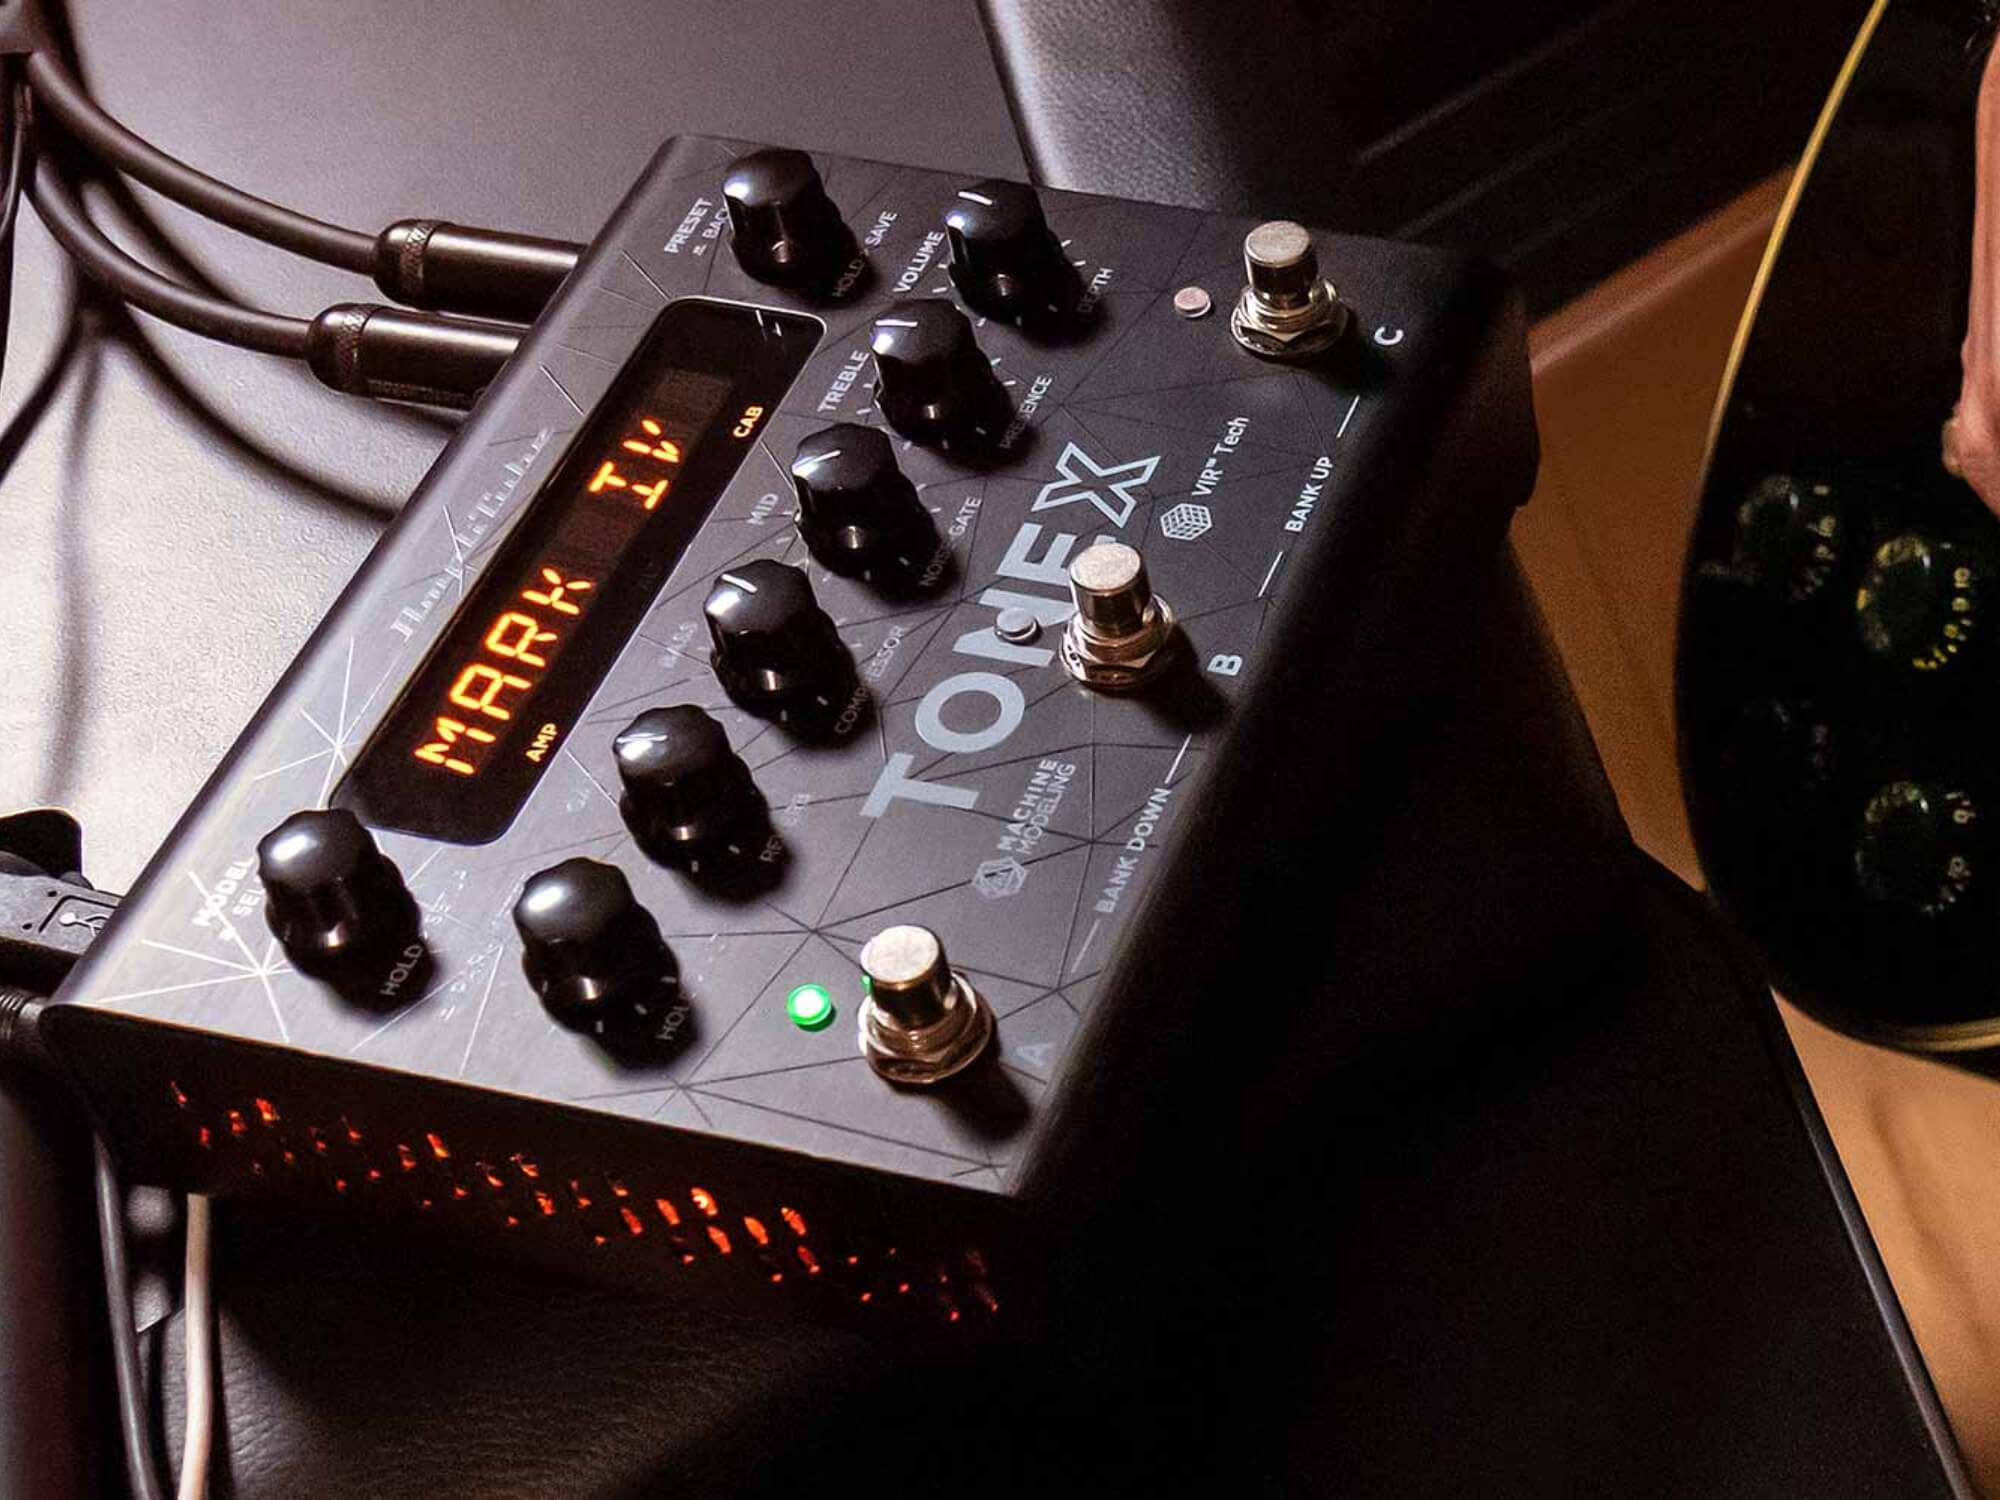 IK Multimedia's ToneX pedal has arrived – here's what it costs